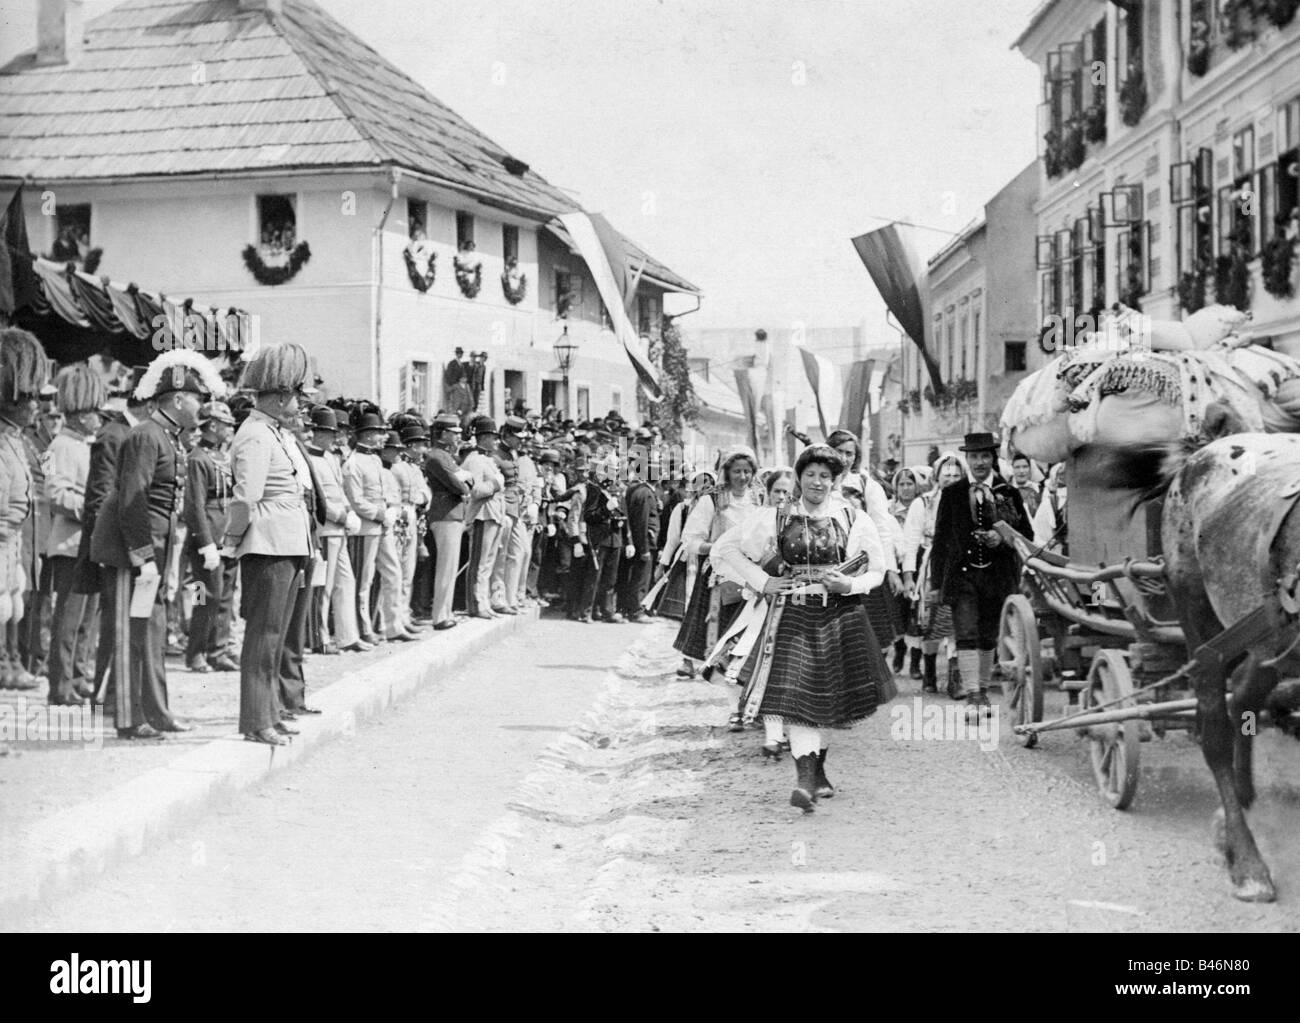 military, Austria-Hungary, Austrian soldiers watching pageant, early 20th century, Austria, Hungary, uniform, uniforms, costume, costumes, cart, crowd, officers, historic, historical, people, 1900s, 1910s, Stock Photo